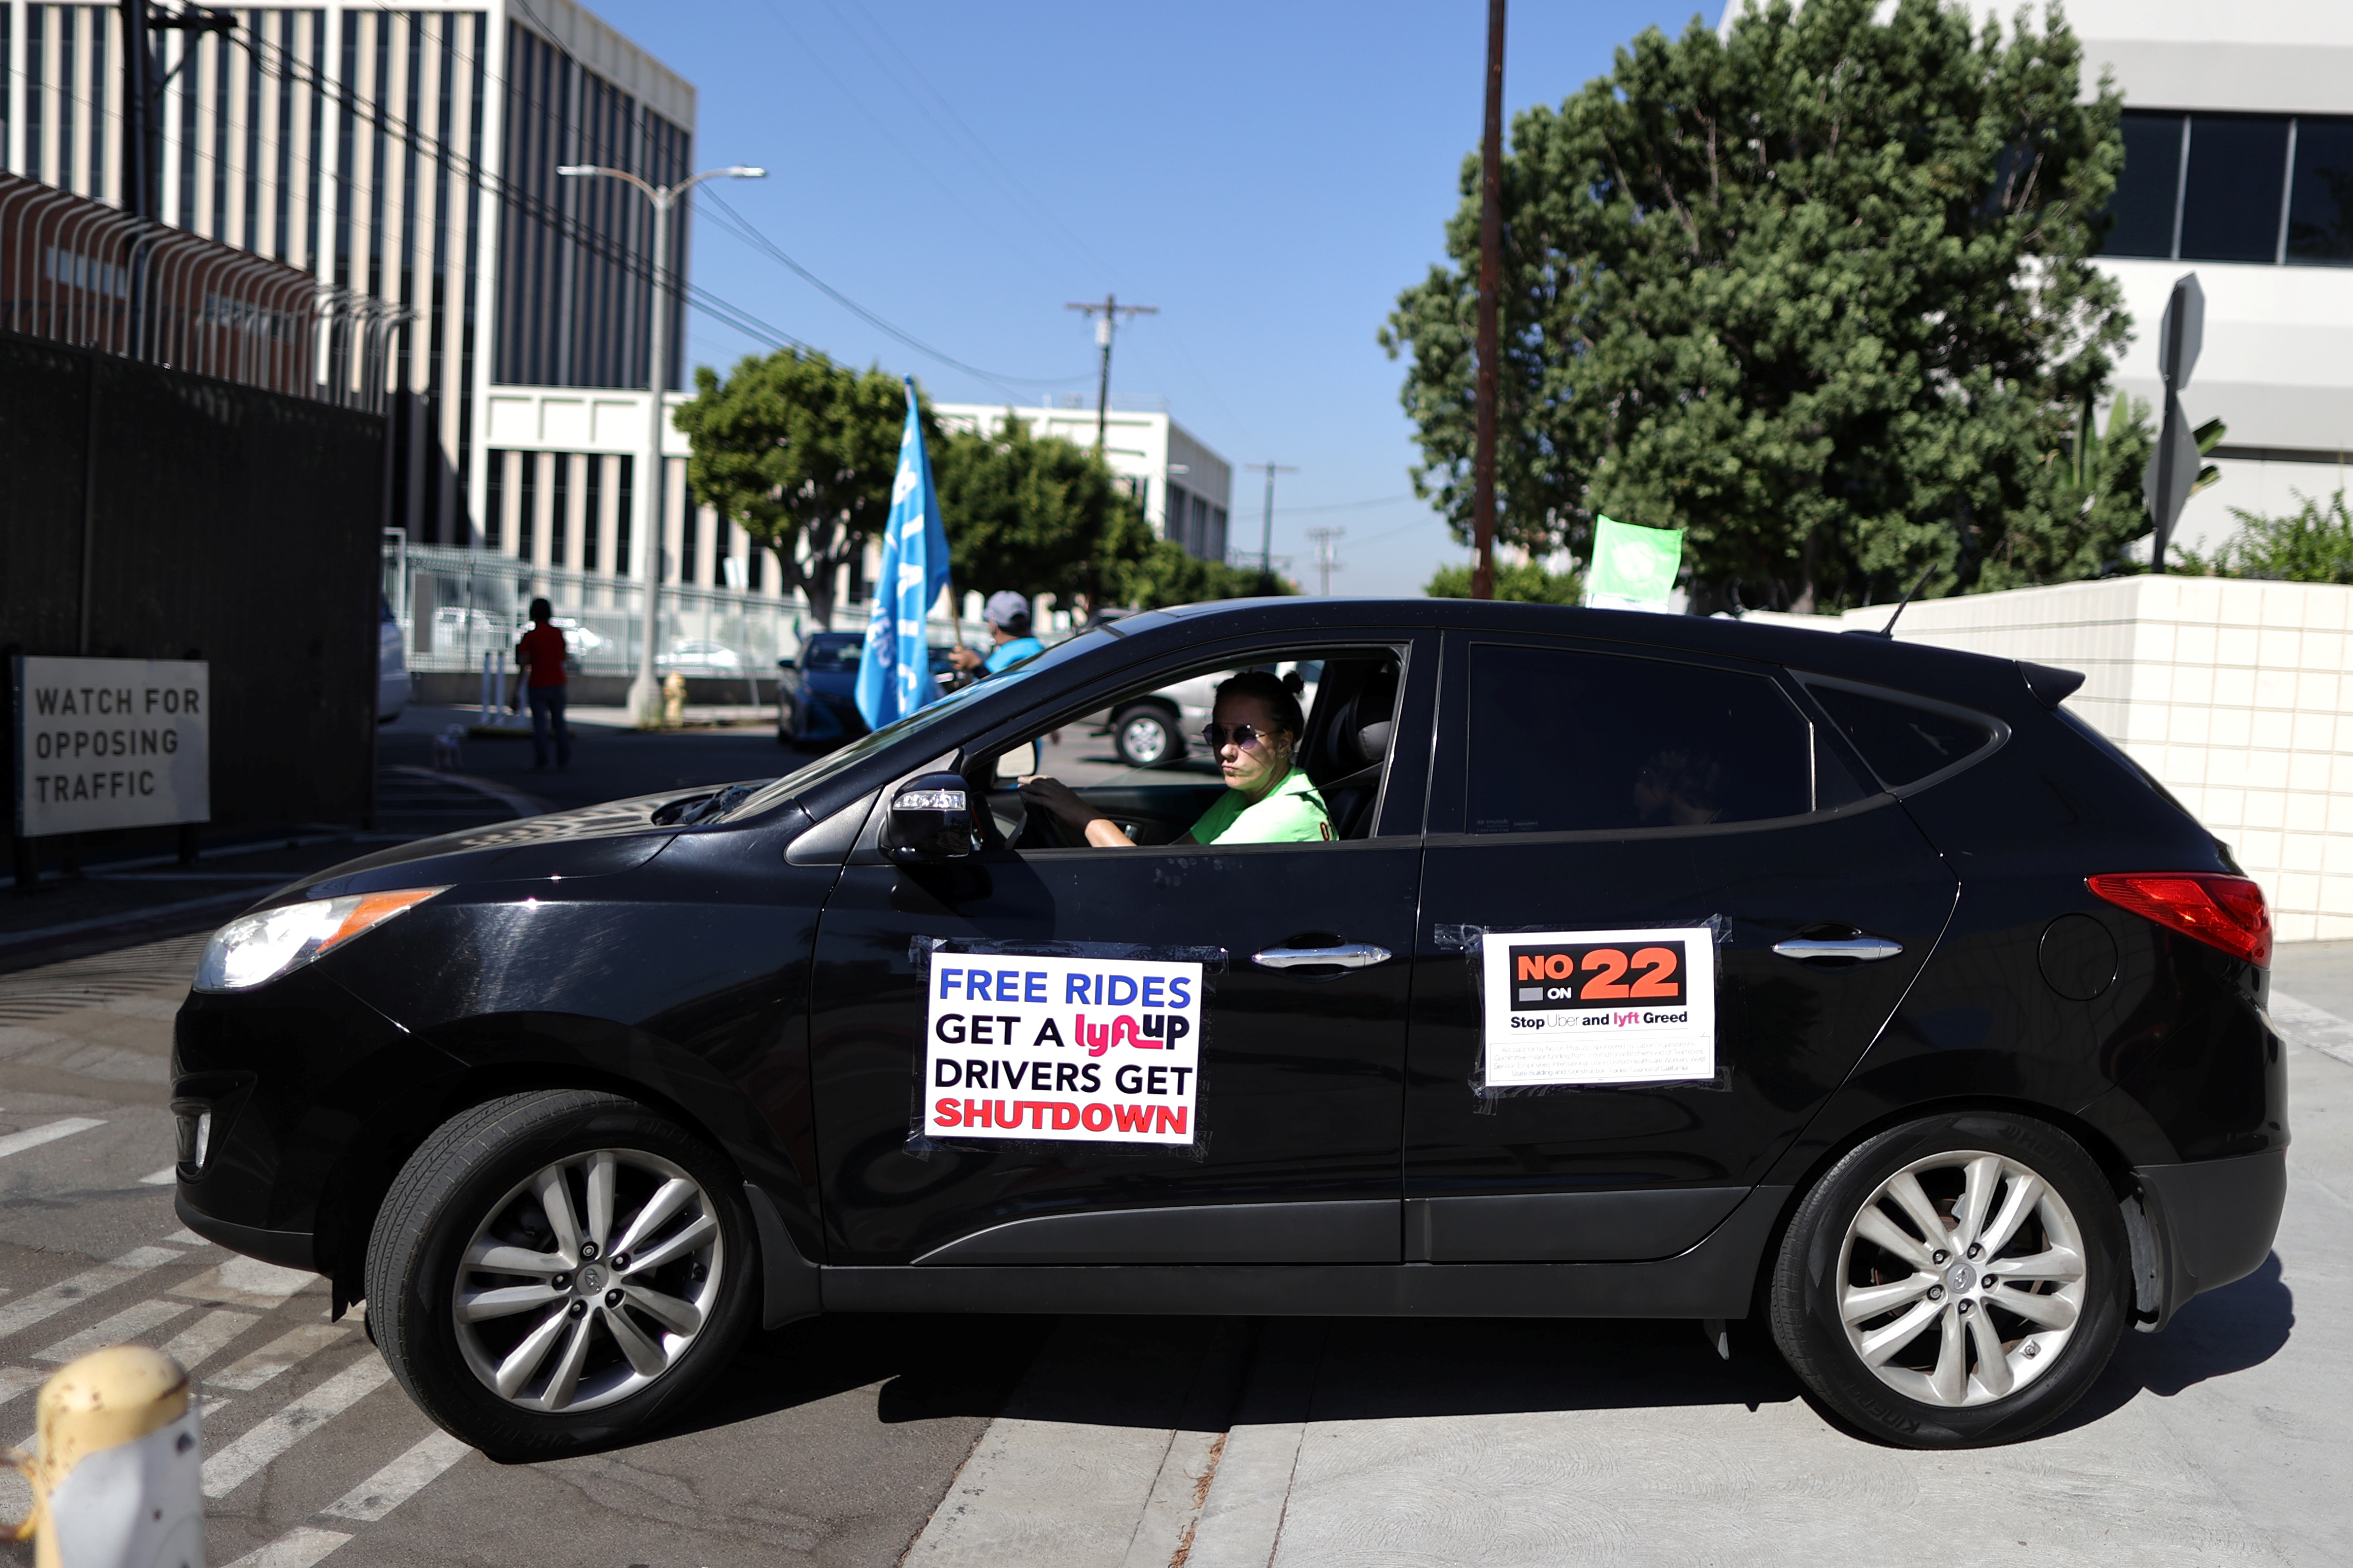 Uber and Lyft rideshare drivers participate in a protest against California Proposition 22 that would classify app-based drivers as independent contractors and not employees or agents, during the coronavirus disease (COVID-19) outbreak, in Los Angeles